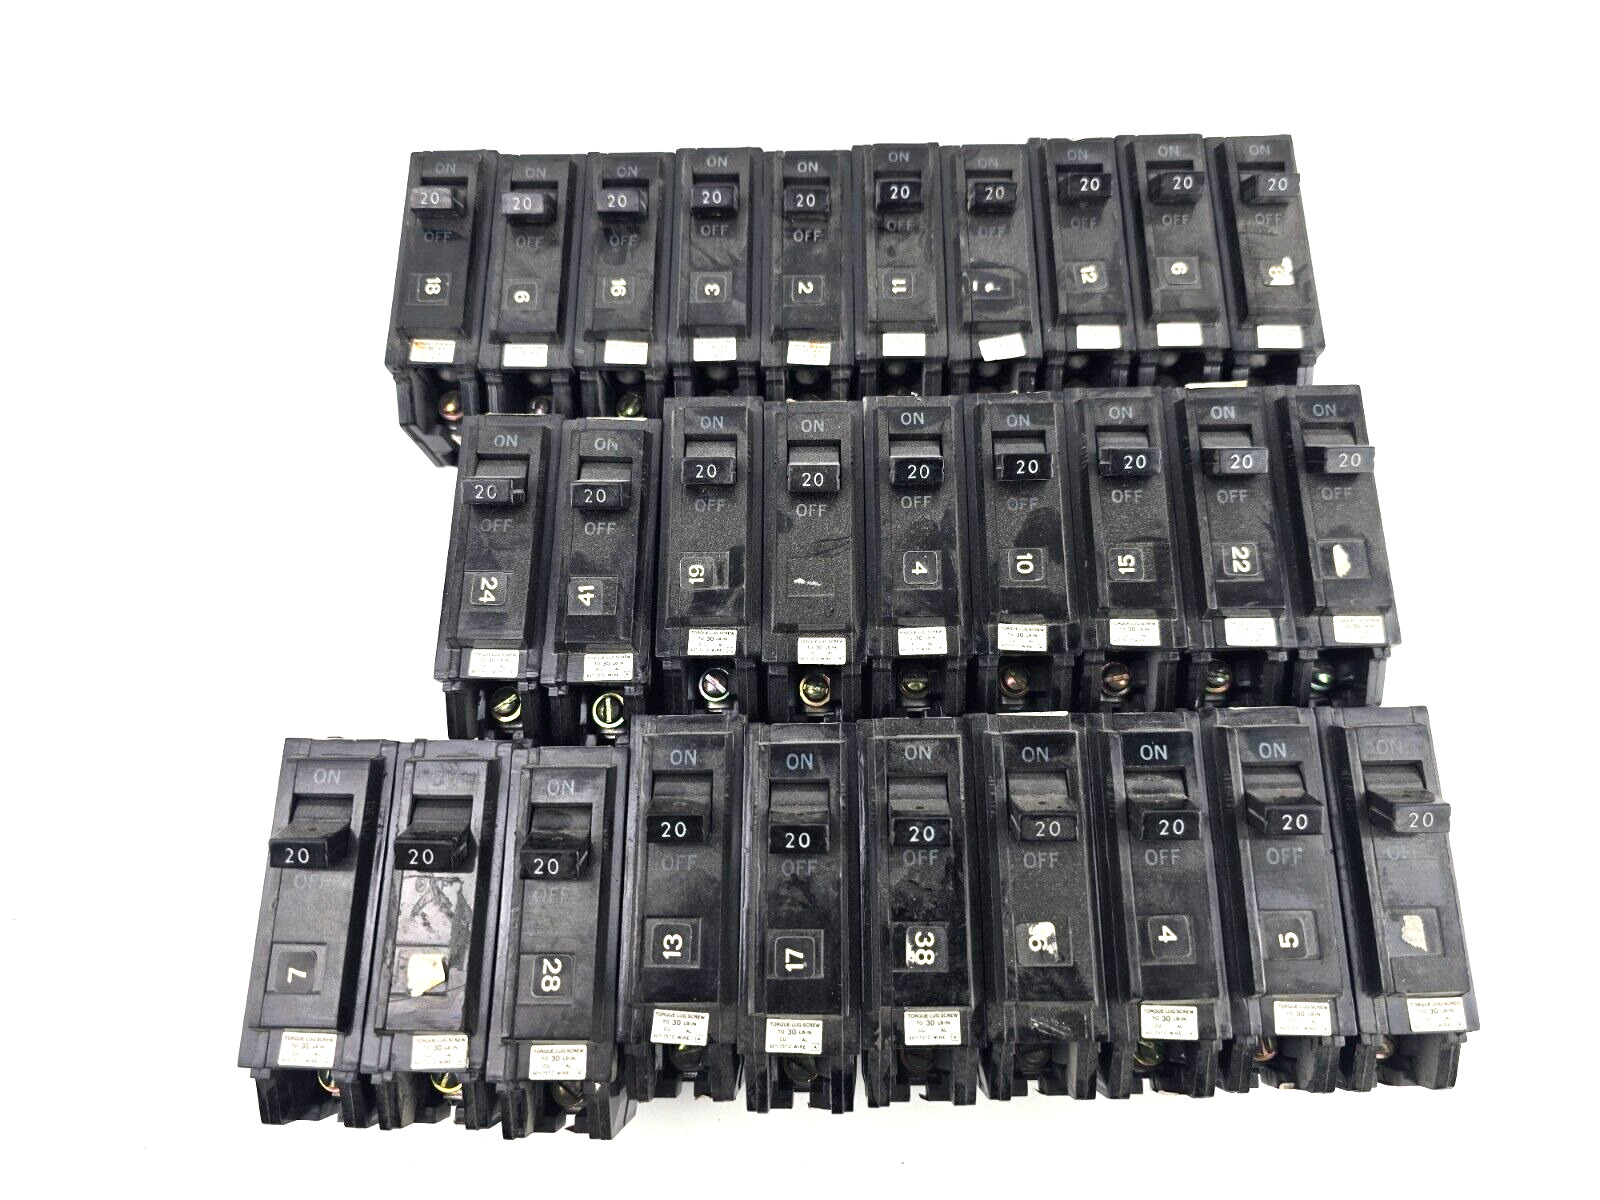 Lot 29pcs GE General Electric 20A 1P 120V Bolt On THQB Circuit Breaker Old Style